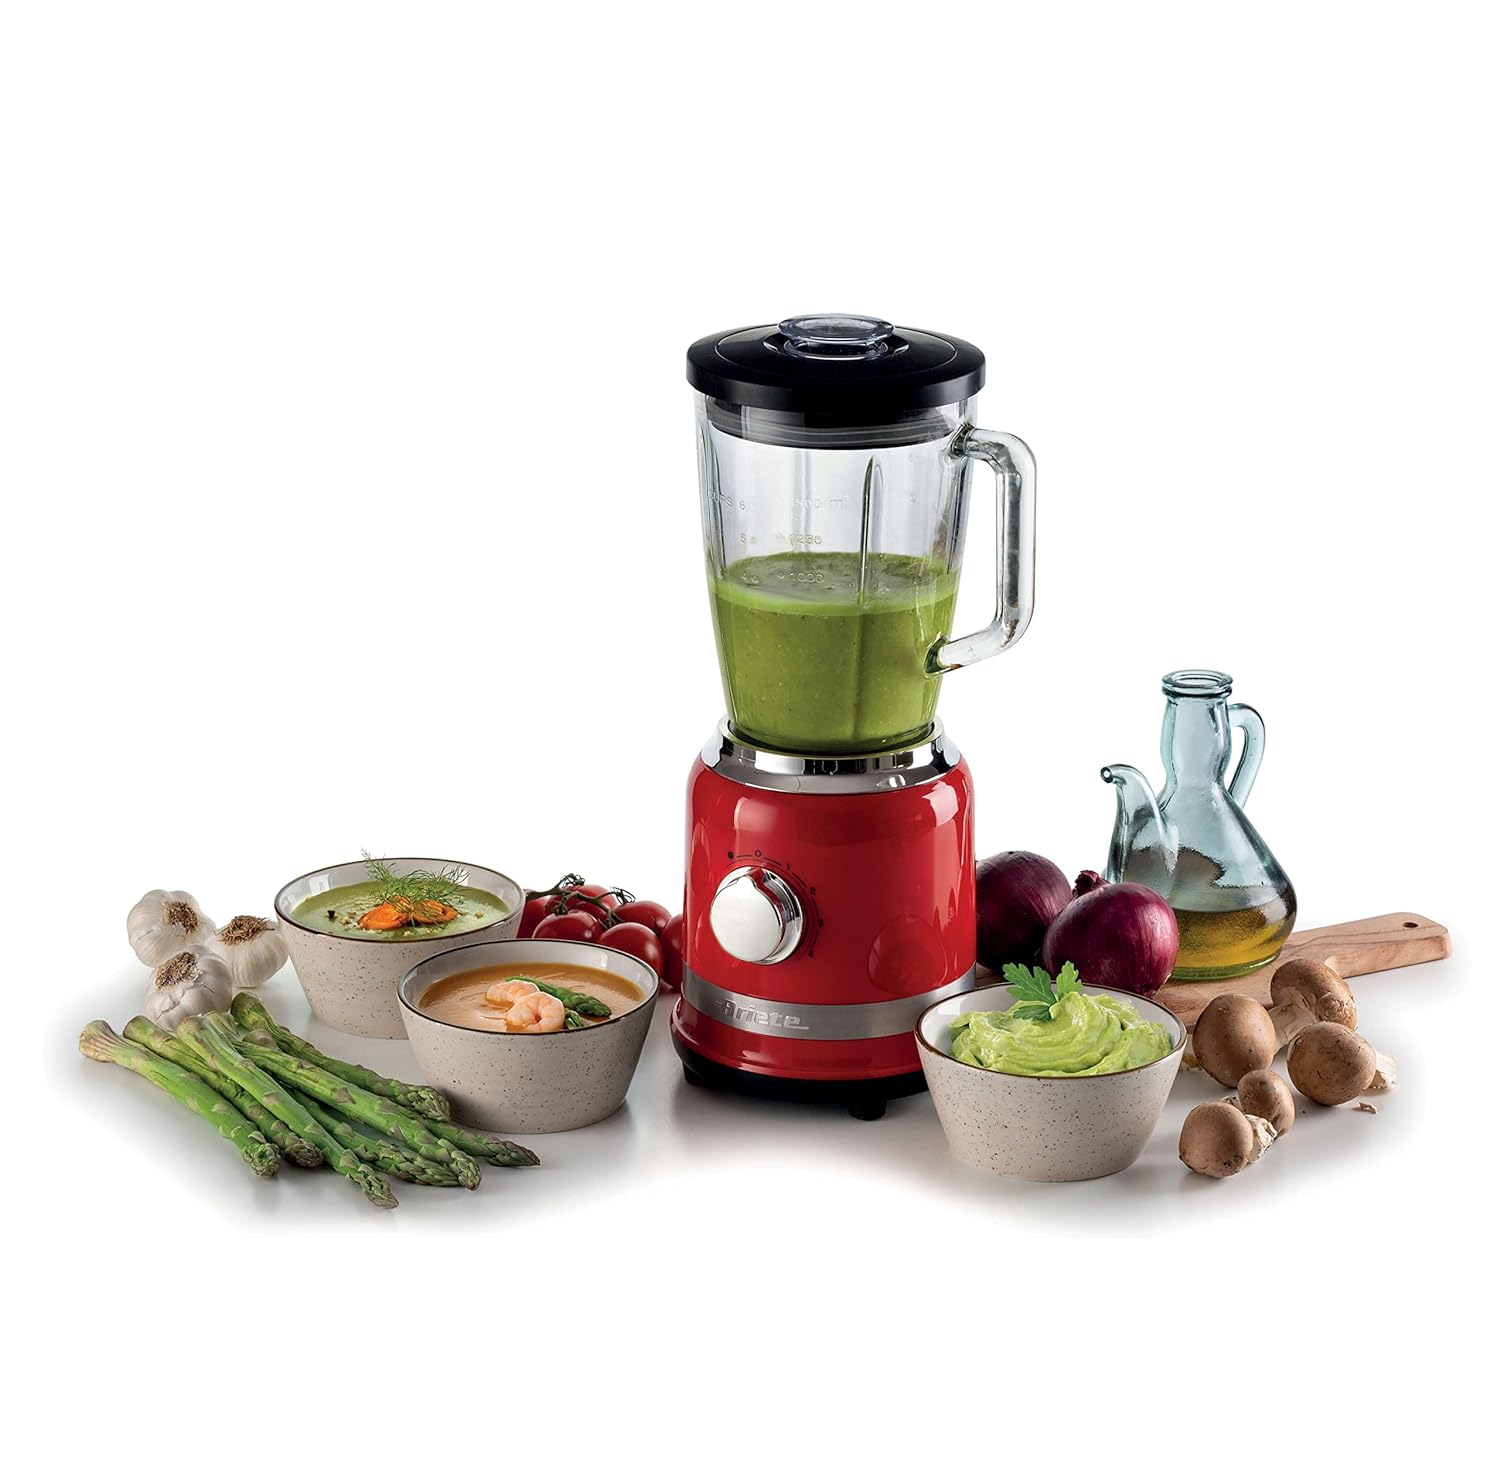 Ariete 585 Modern Blender, 1000 W, 1.5 L Capacity, 4 Speeds + Pulse Function, Graduated Glass Cup, 4 Stainless Steel Blades, Red - Mahajan Electronics Online